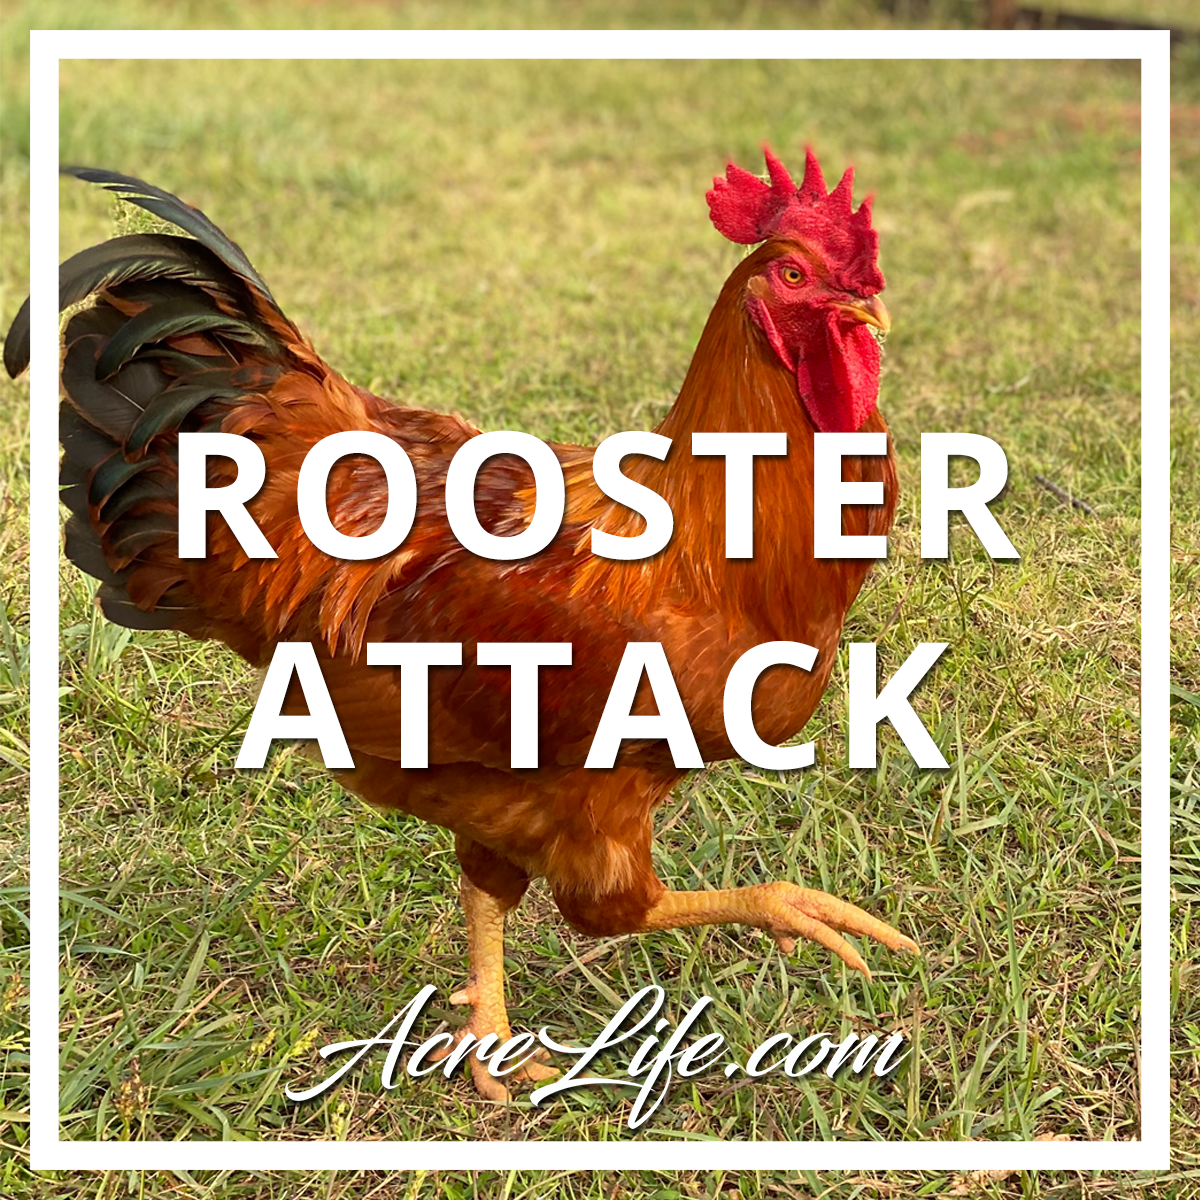 Rooster Attack - Acre Life